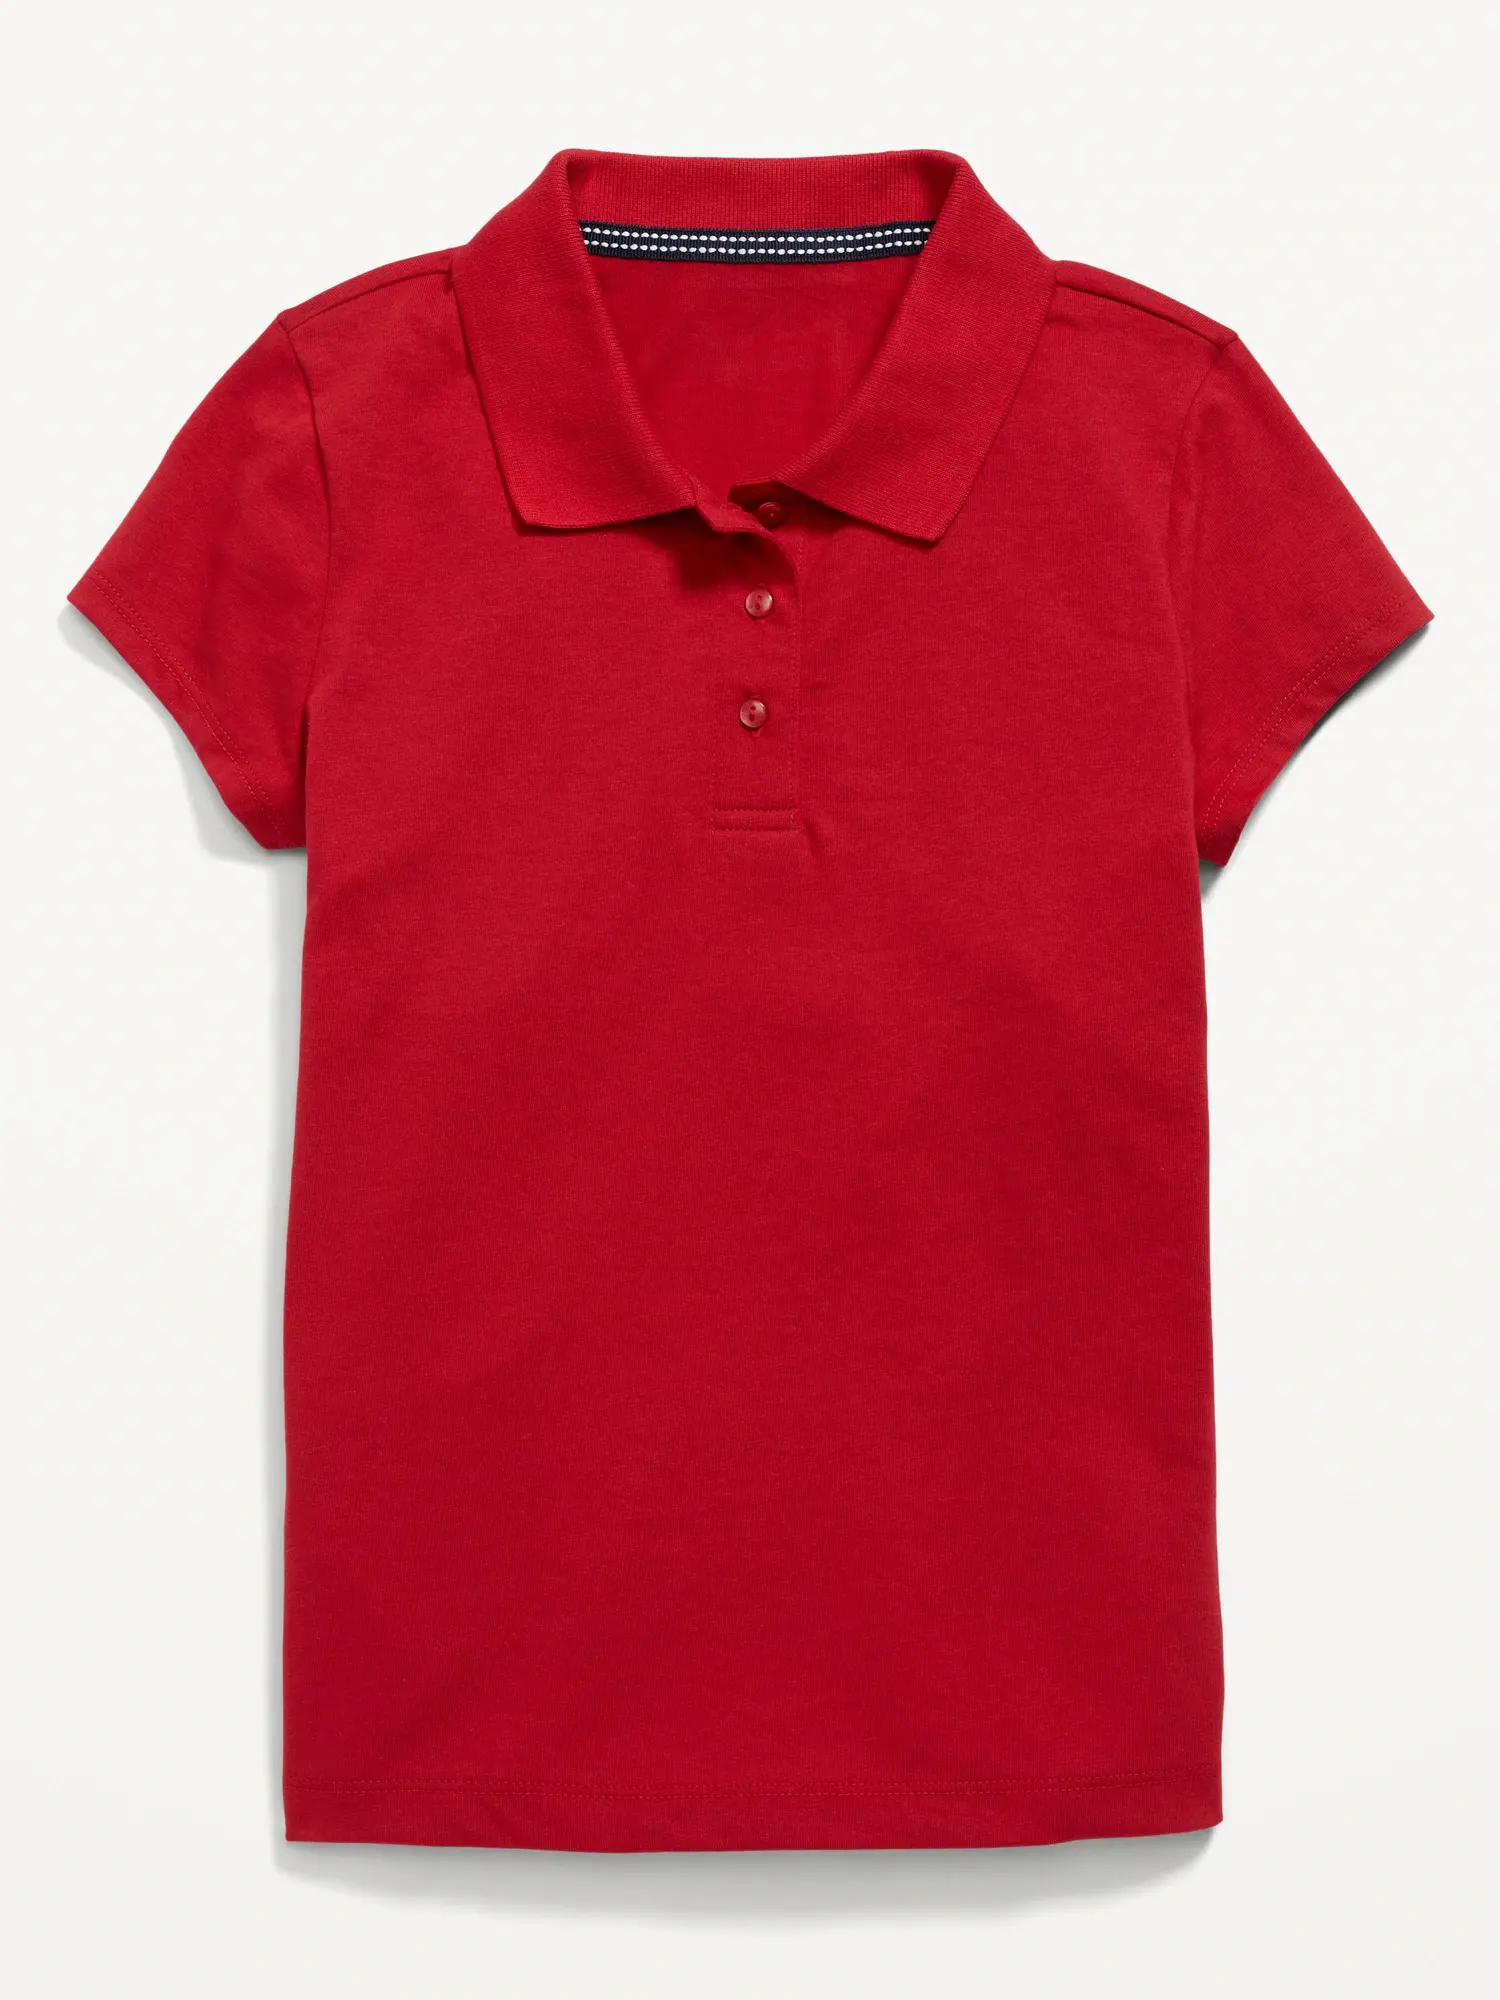 Old Navy Uniform Jersey Polo Shirt for Girls red. 1